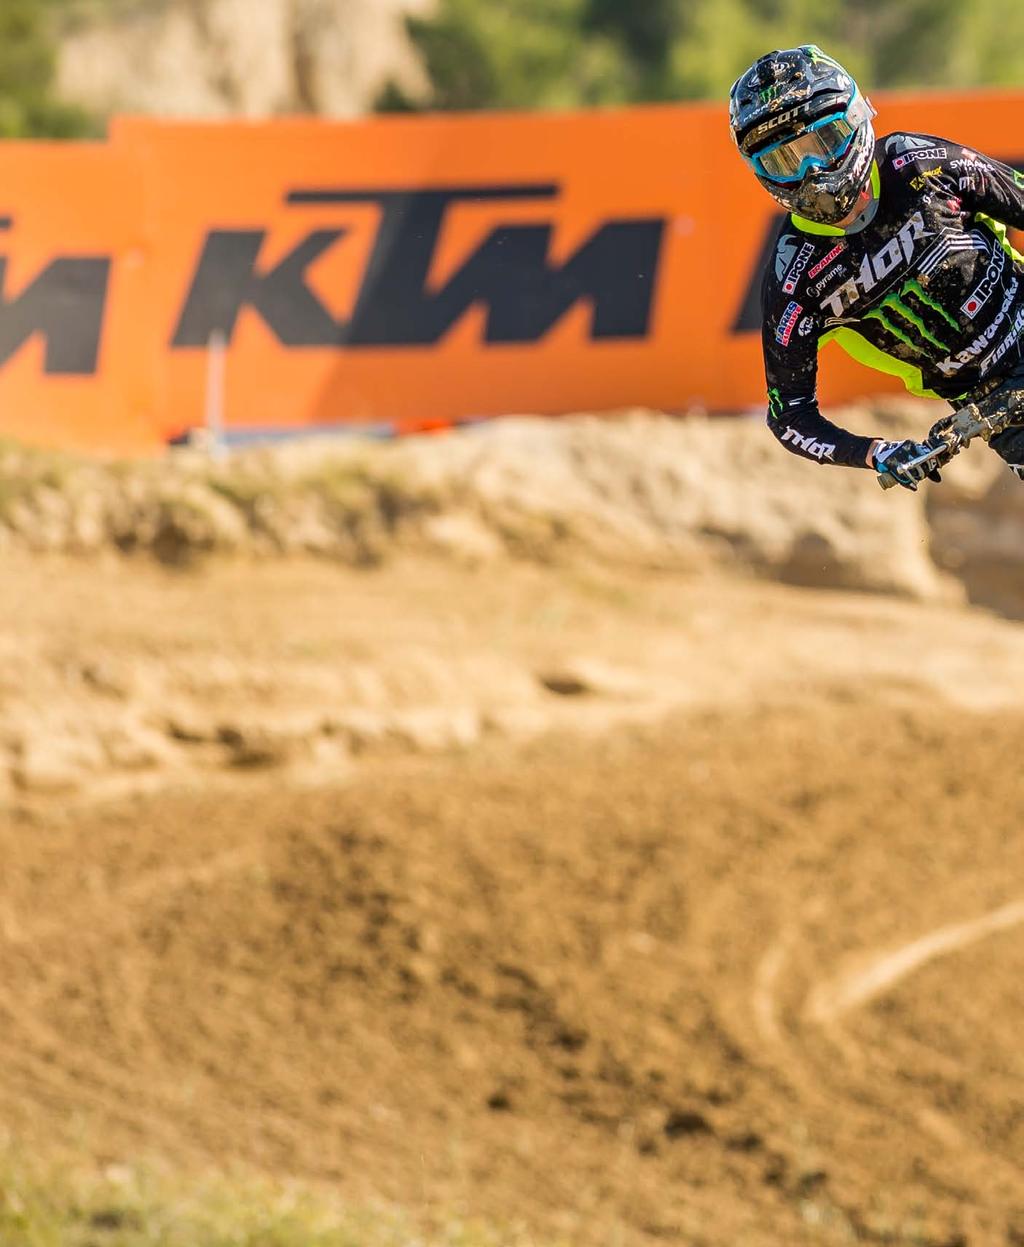 INTERVIEW MX2 RACER THOMAS COVINGTON P70 I THINK AS FAR AS OUTDOORS GO THE EUROPEANS HAVE PROVEN THEMSELVES TO BE THE TOP GUYS HERE RECENTLY. BUT I THINK IF THE TOP EUROPEAN GUYS WENT TO THE U.S. THEY D ALSO STRUGGLE A LITTLE BIT, JUST LIKE RV [VILLOPOTO] IS HERE.